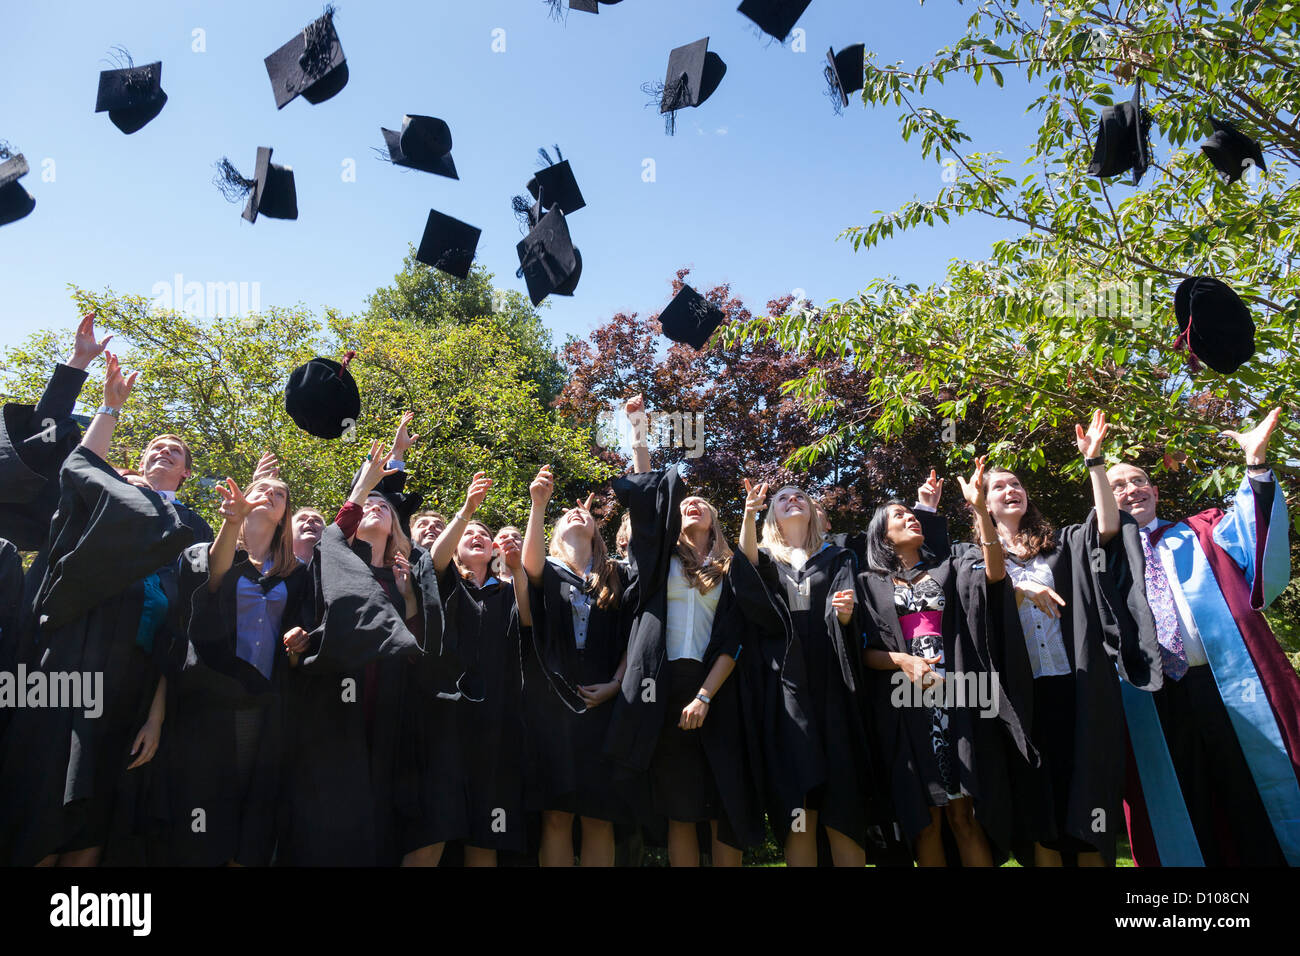 Graduates from the Engineering School of the University of Southampton, England, try to catch their mortar boards. Stock Photo